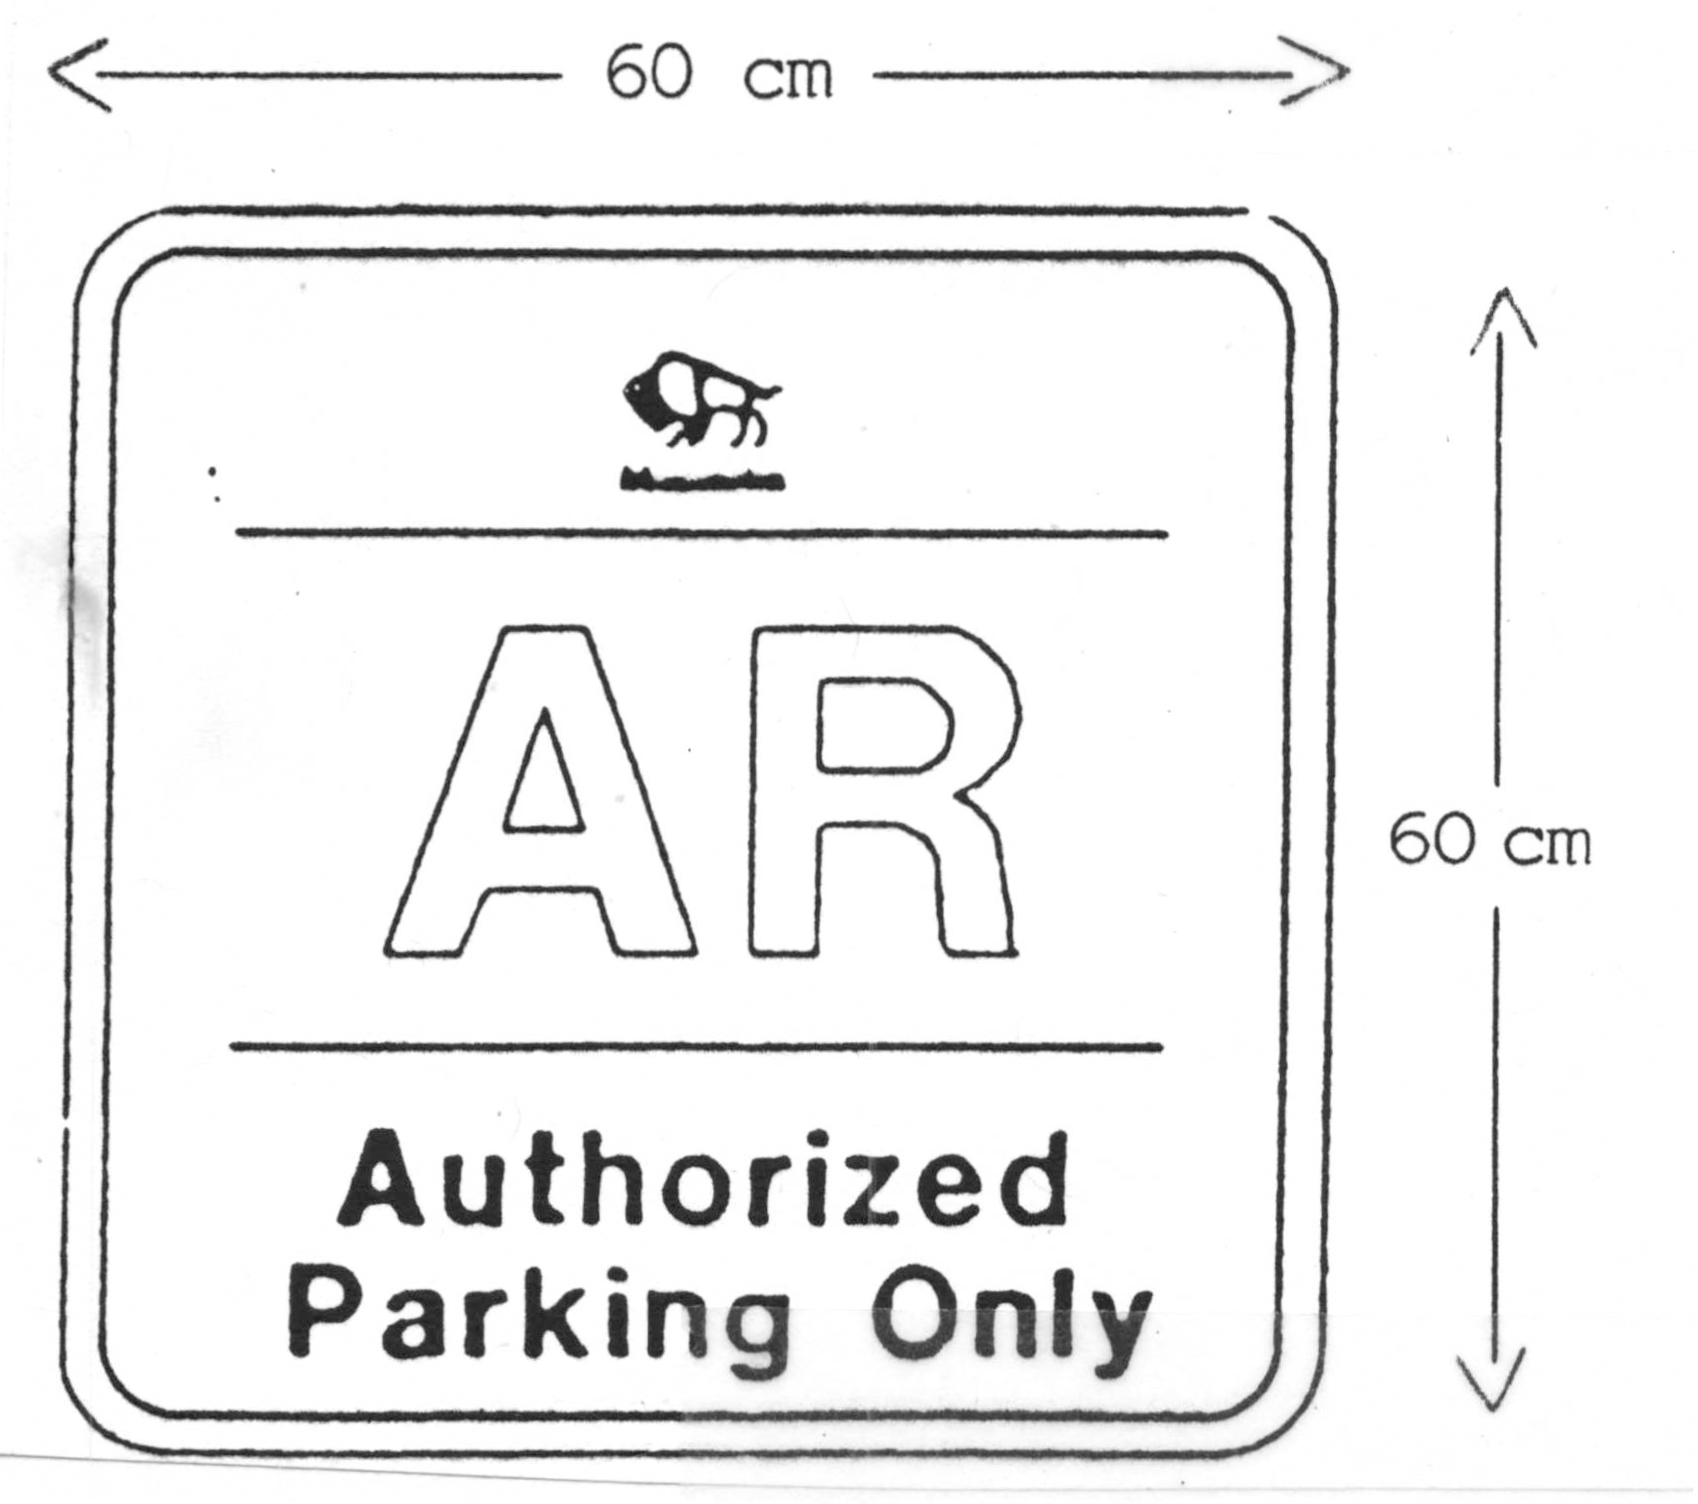 Sign: Authorized Parking Only